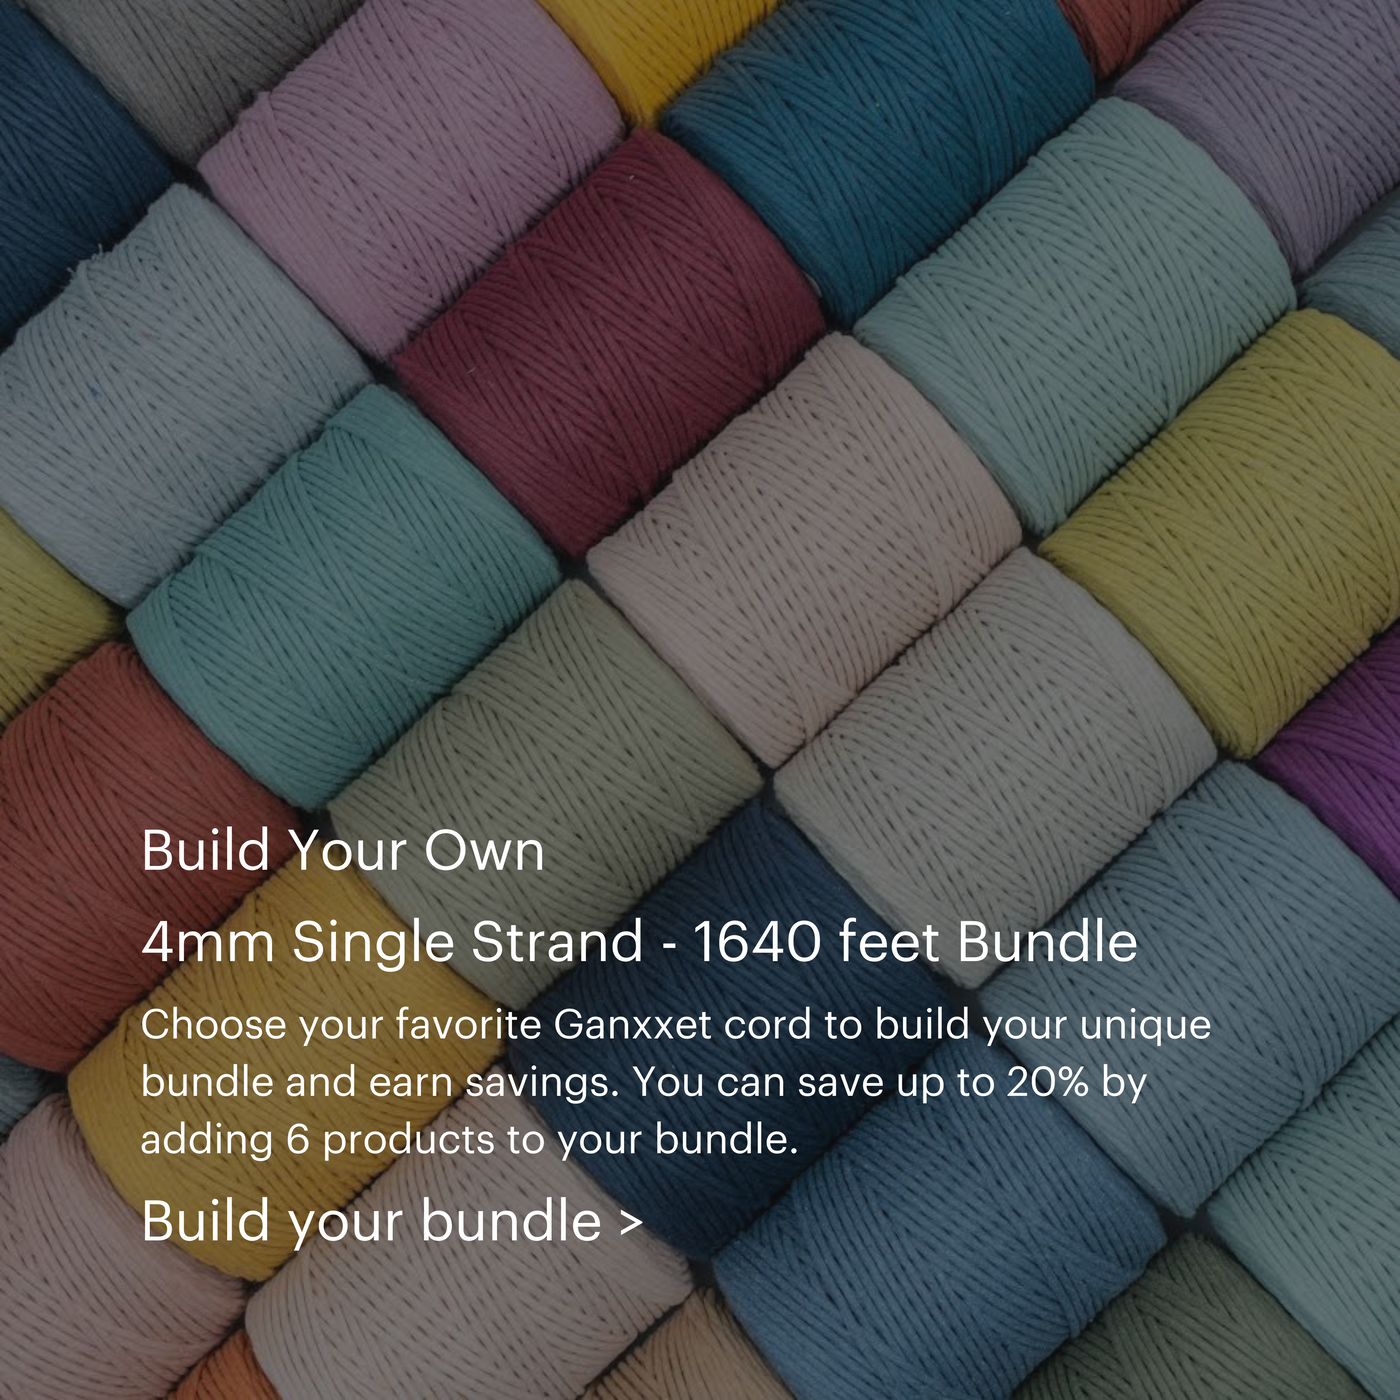 Build Your Own Bundle of 4mm Single Strand - 1640 feet